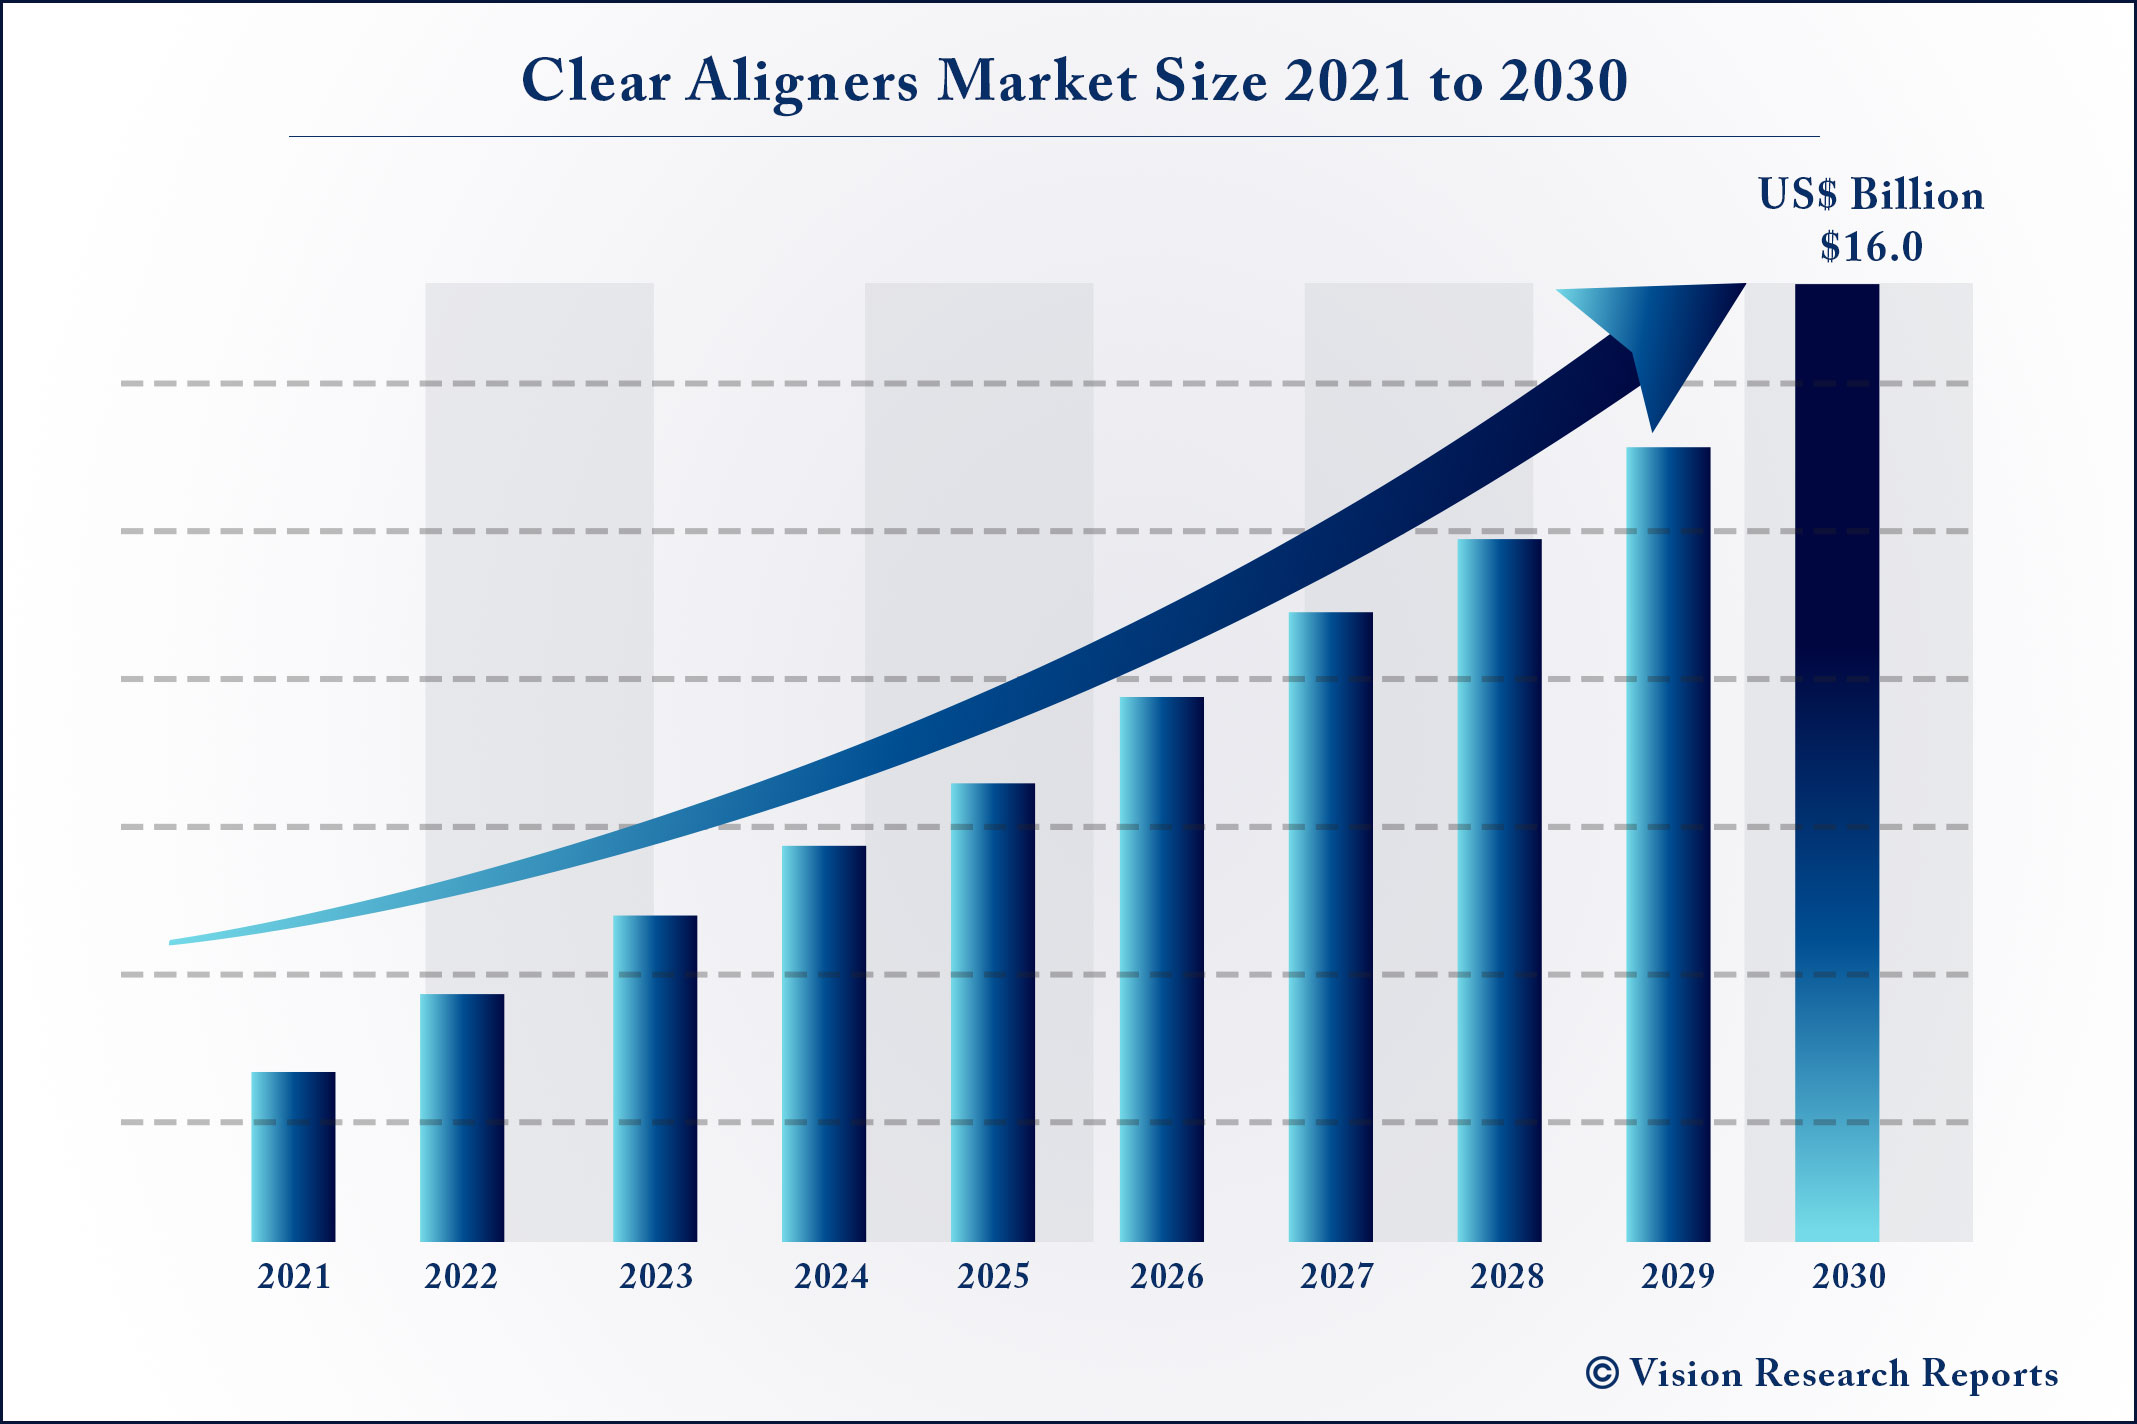 Clear Aligners Market Size 2021 to 2030